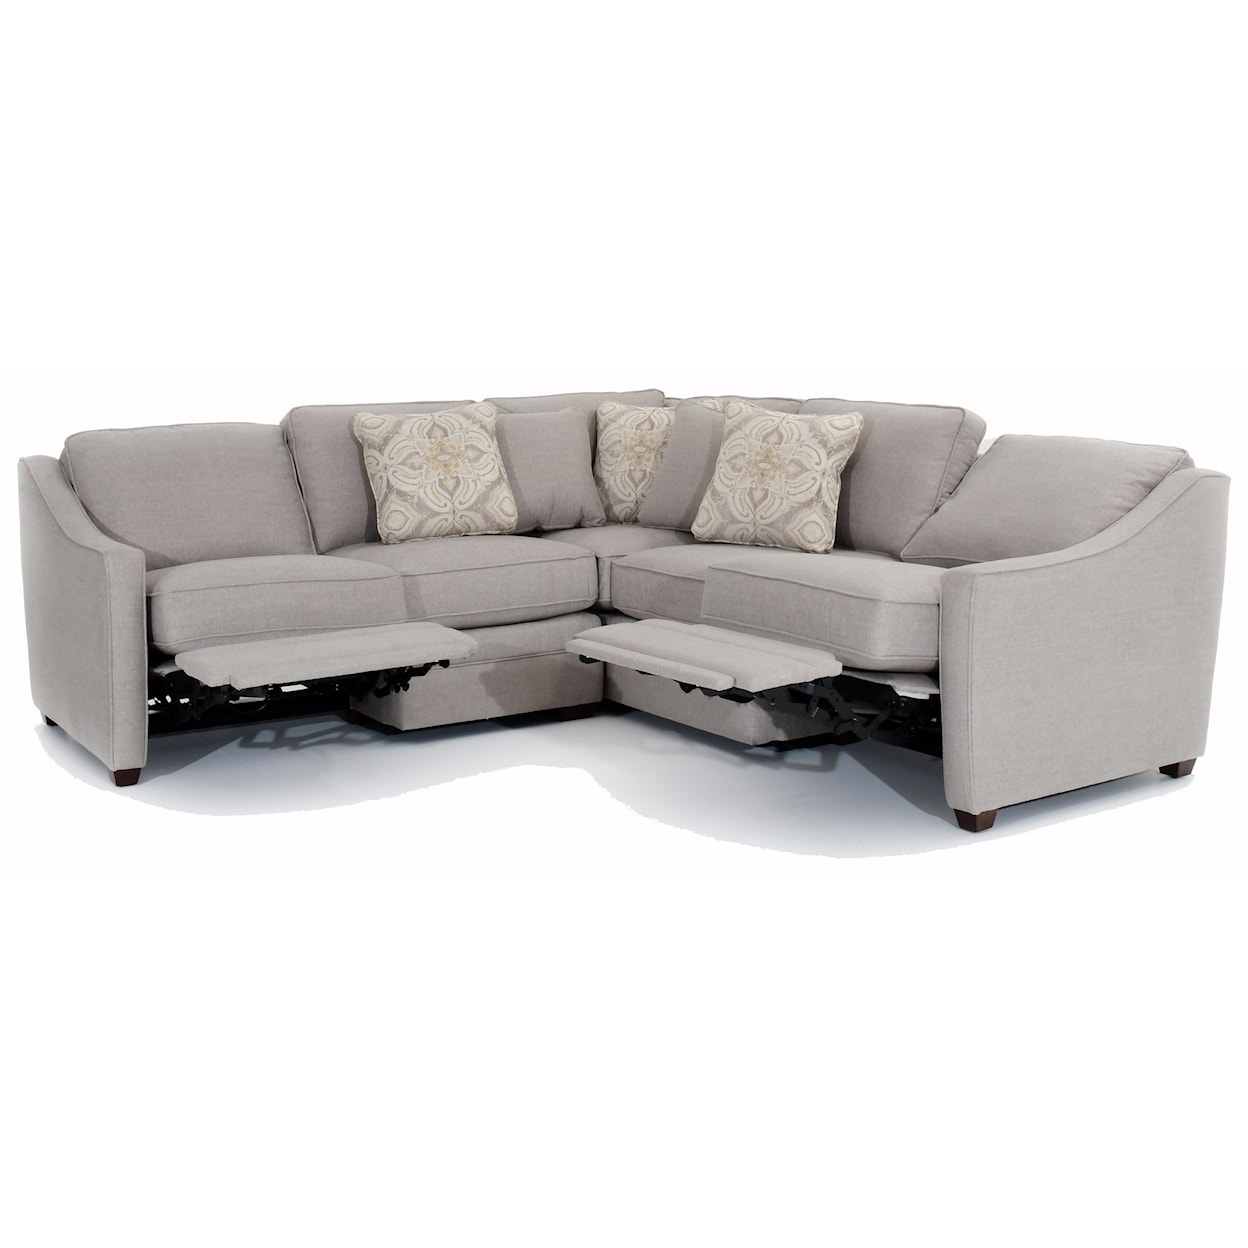 Hickorycraft F9 Series Custom 2 Pc Sectional w/ Recliners